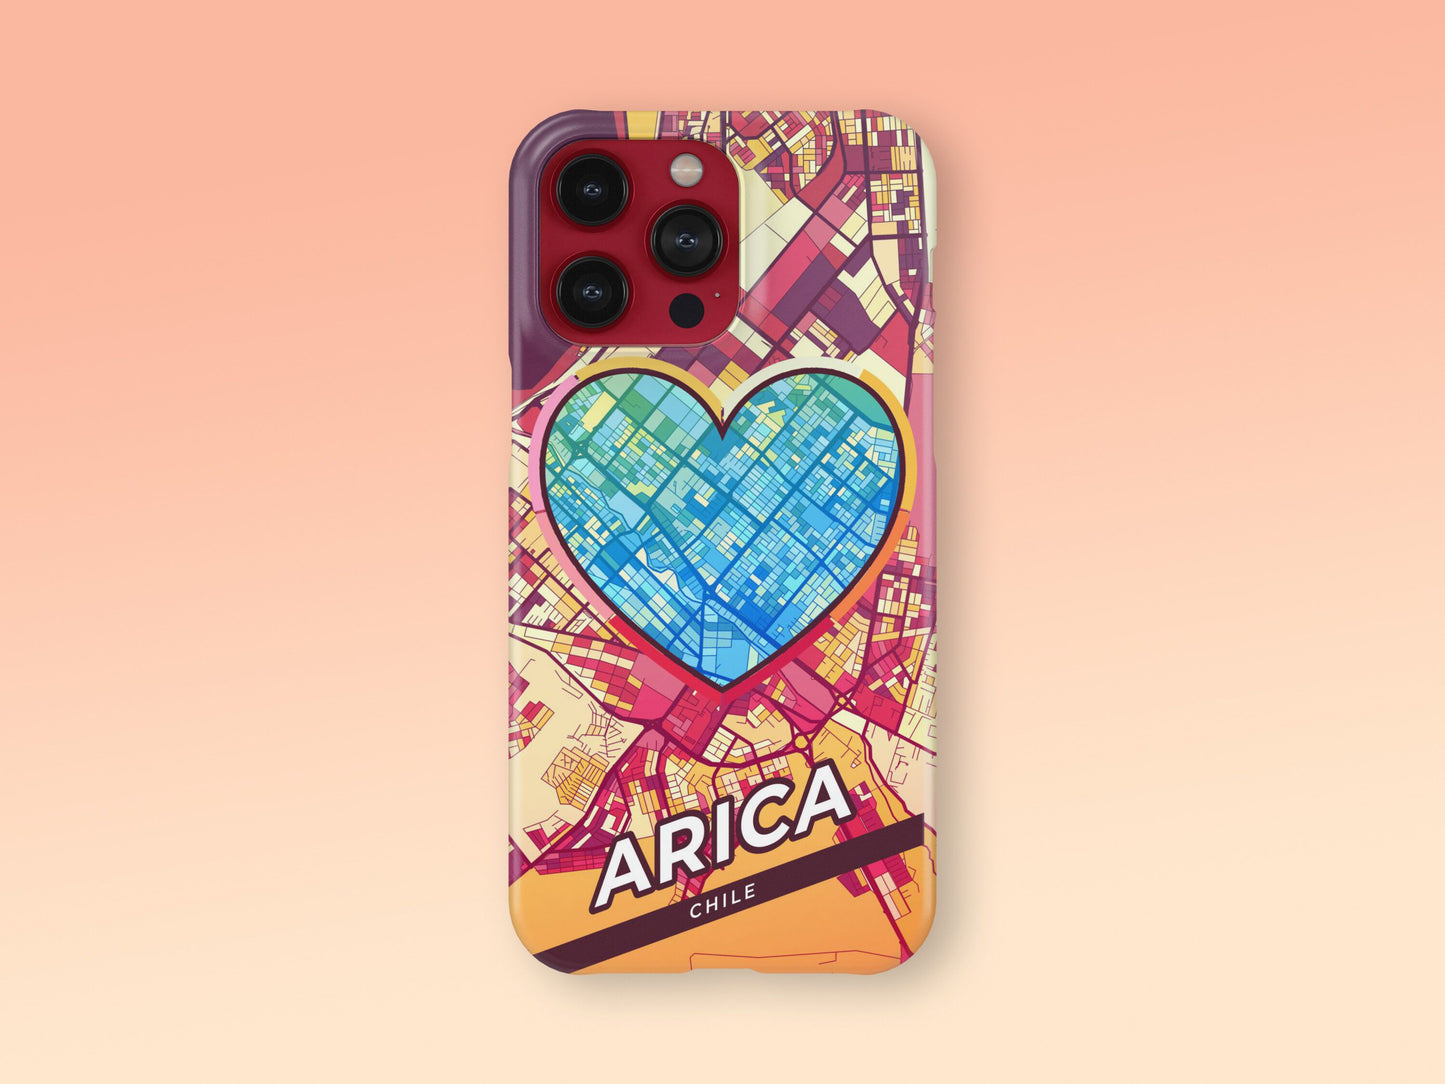 Arica Chile slim phone case with colorful icon. Birthday, wedding or housewarming gift. Couple match cases. 2